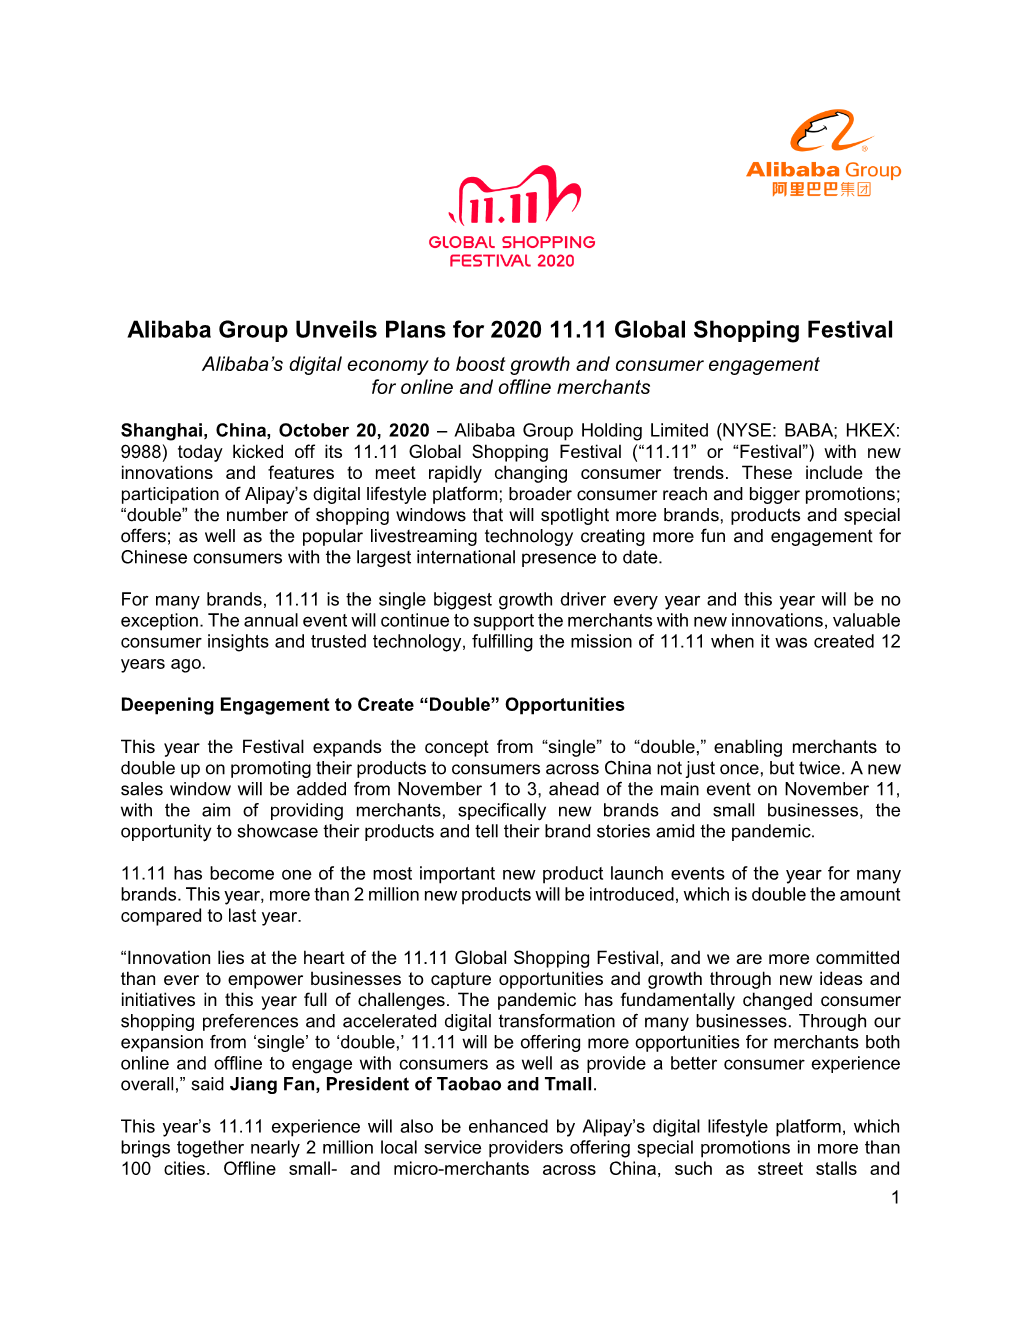 Alibaba Group Unveils Plans for 2020 11.11 Global Shopping Festival